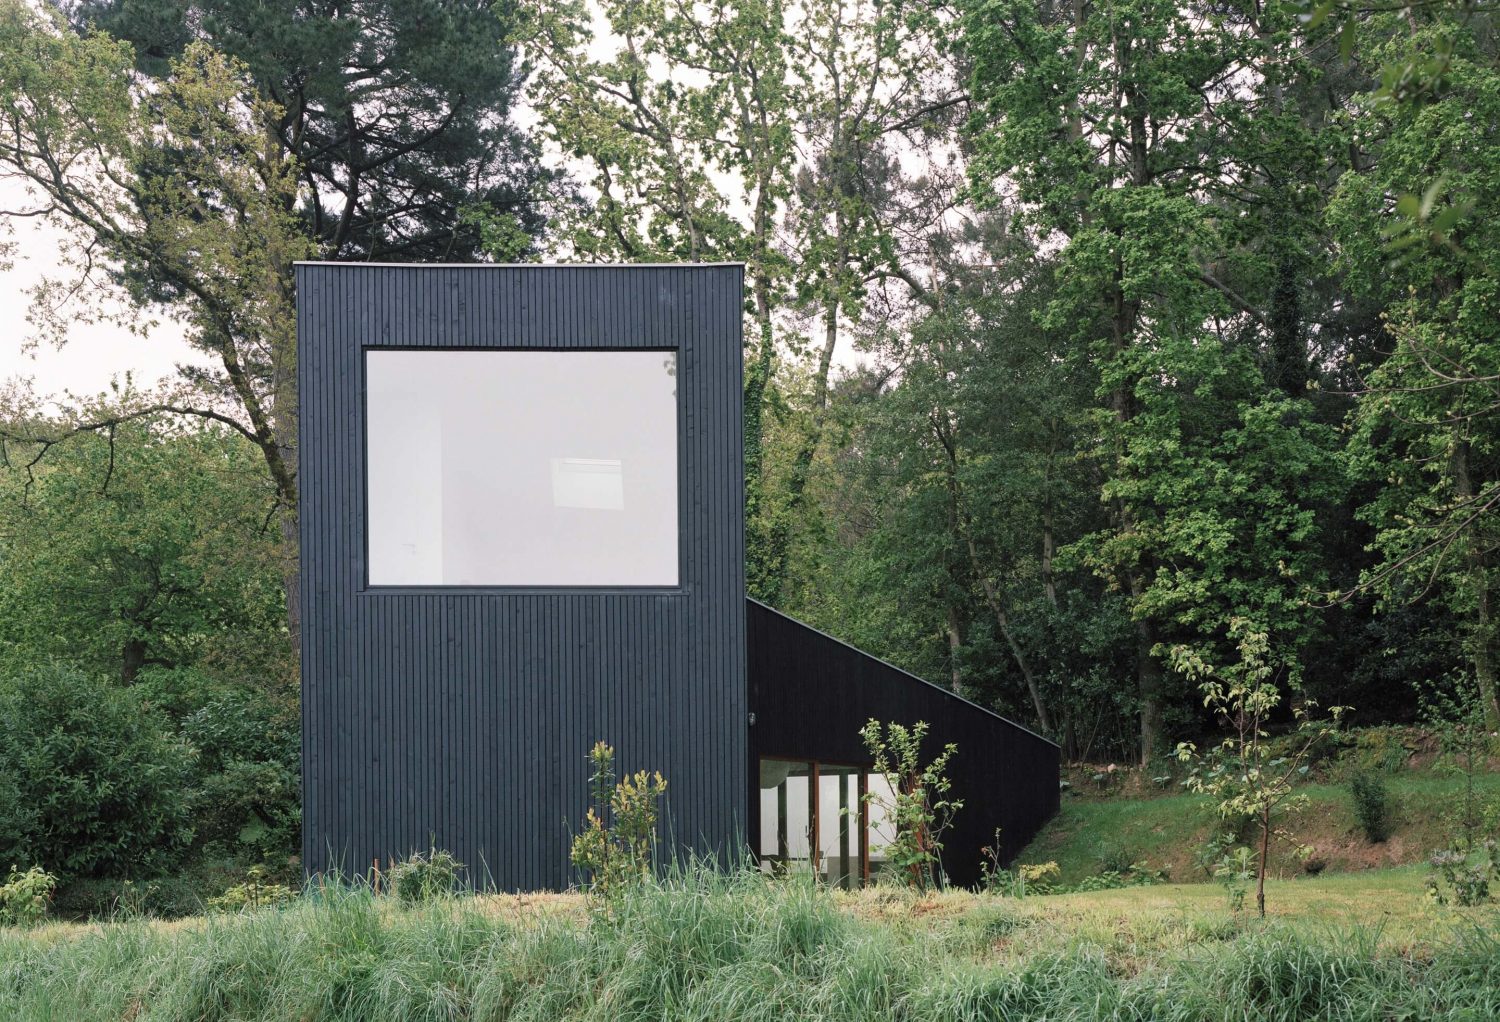 Holiday Home in France by Raum Architects